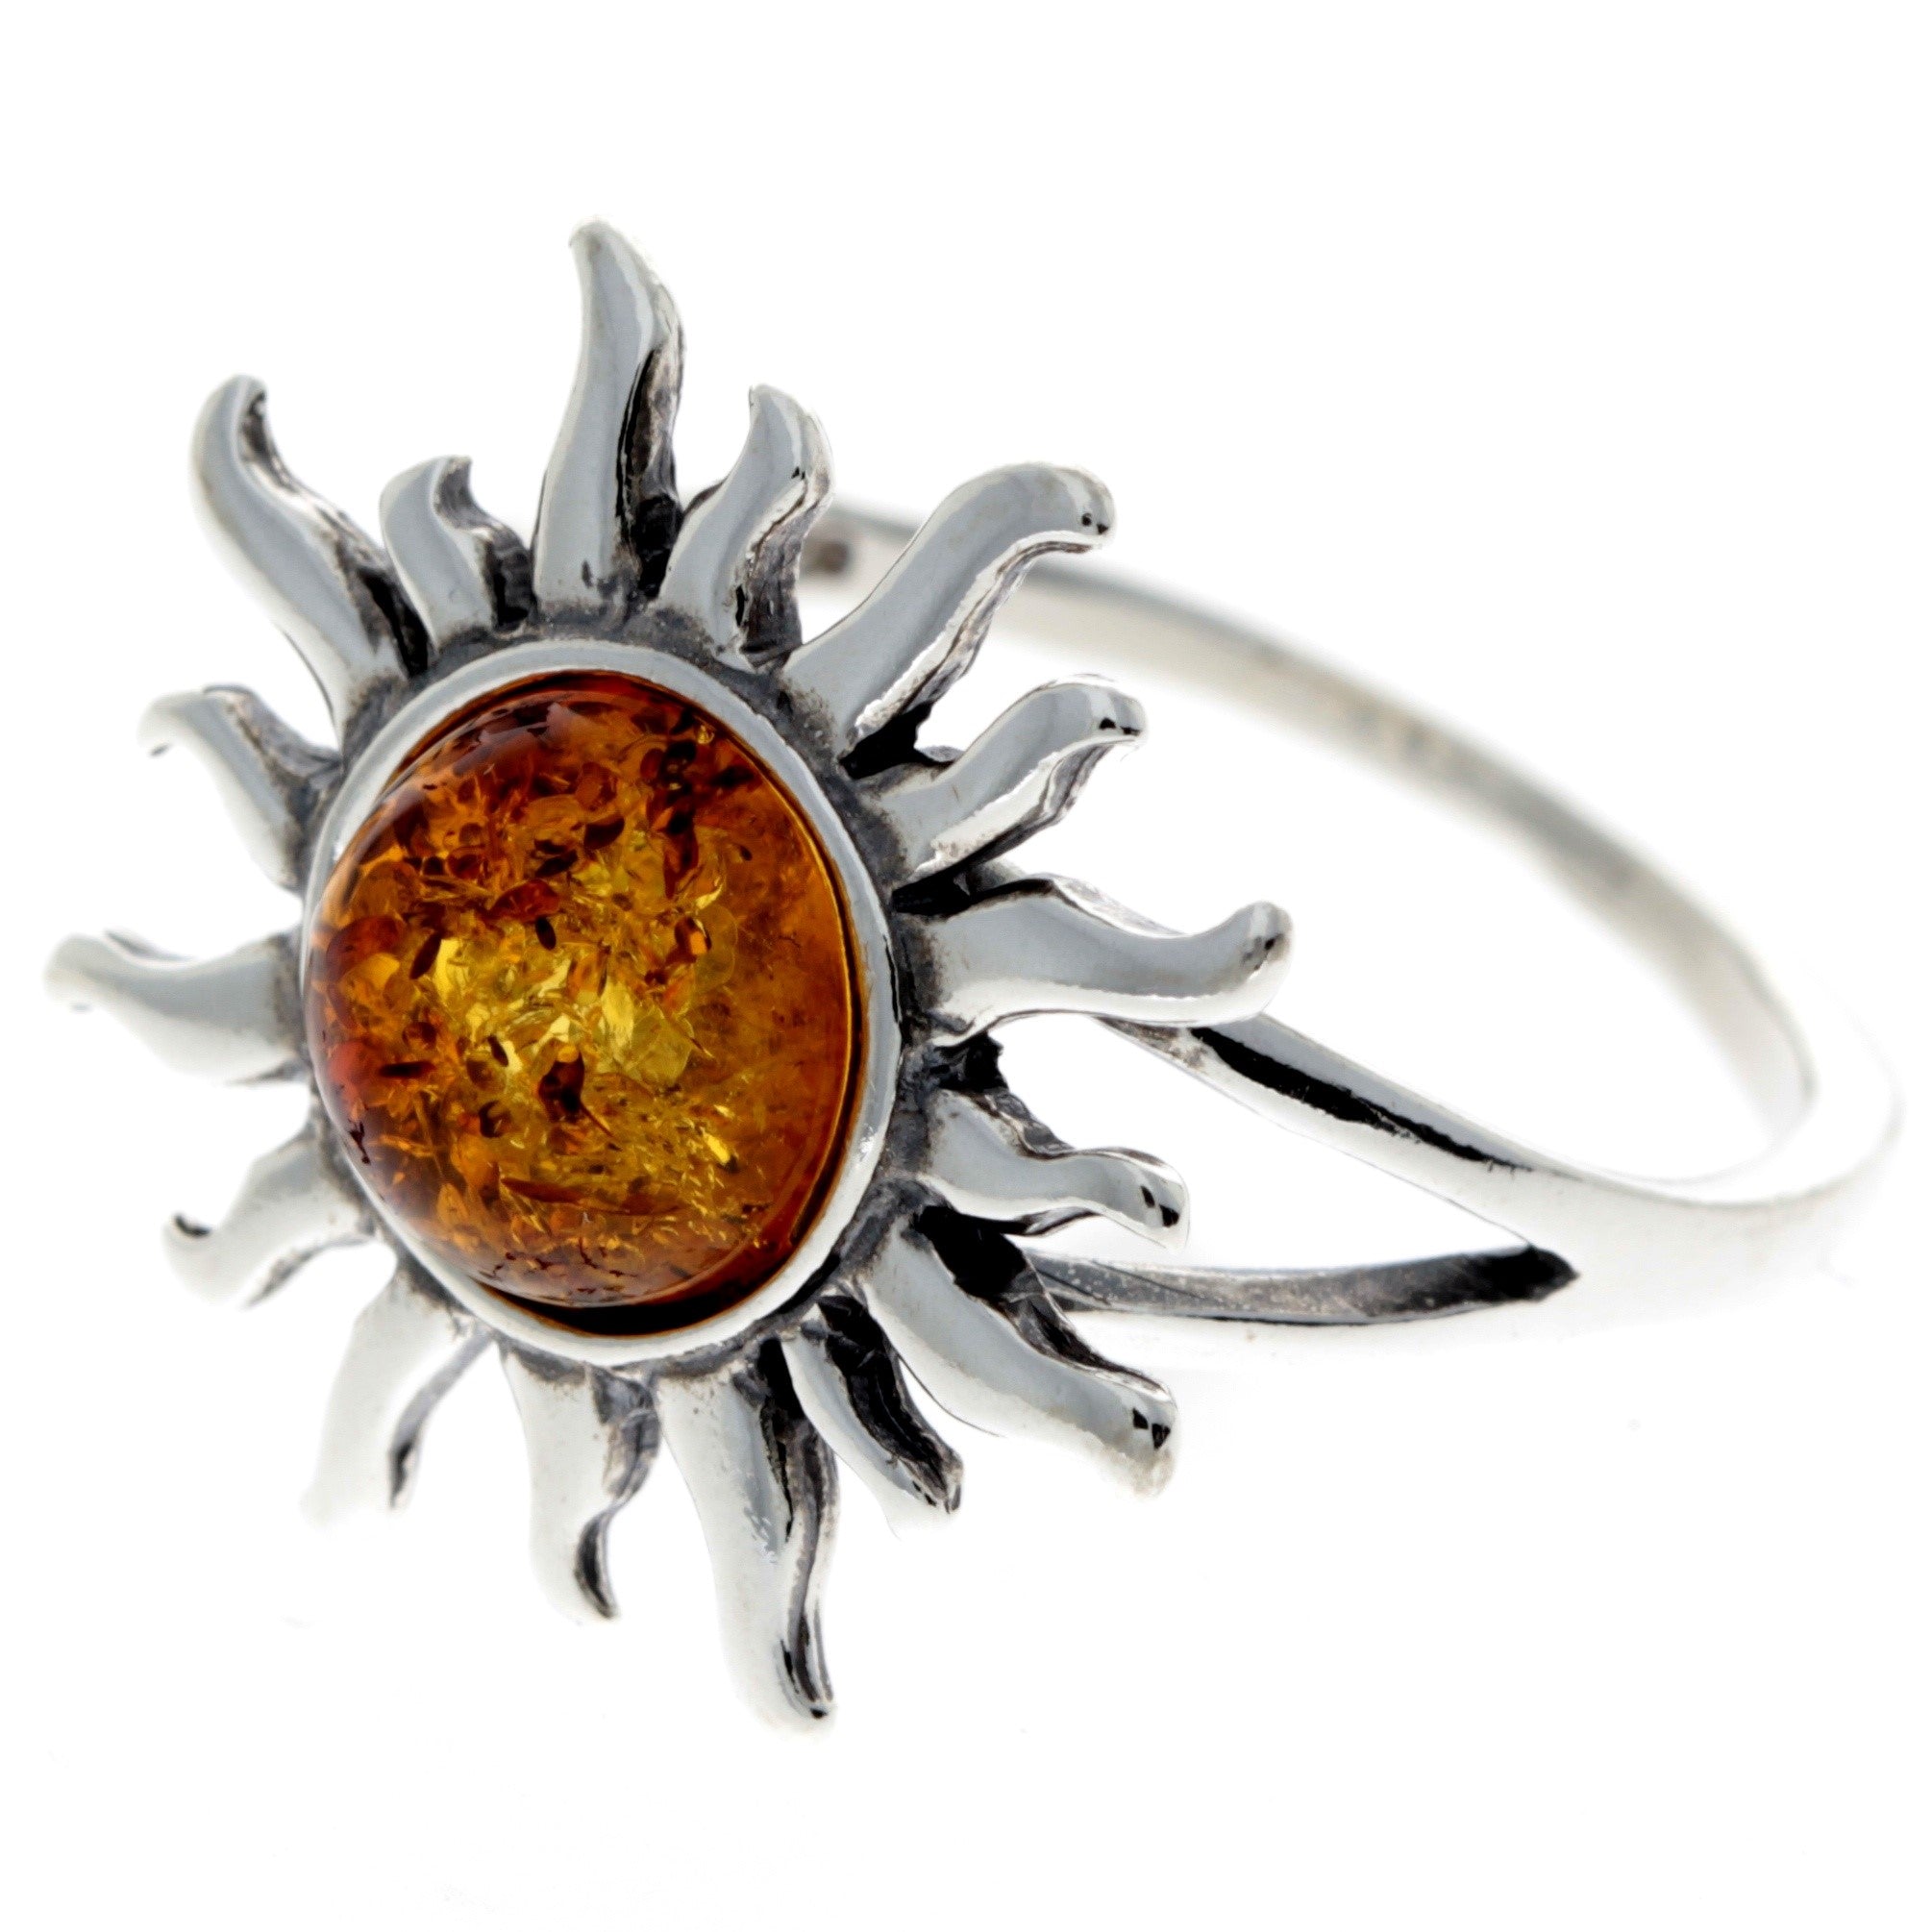 925 Sterling Silver & Genuine Baltic Amber Sun Ring - 7374